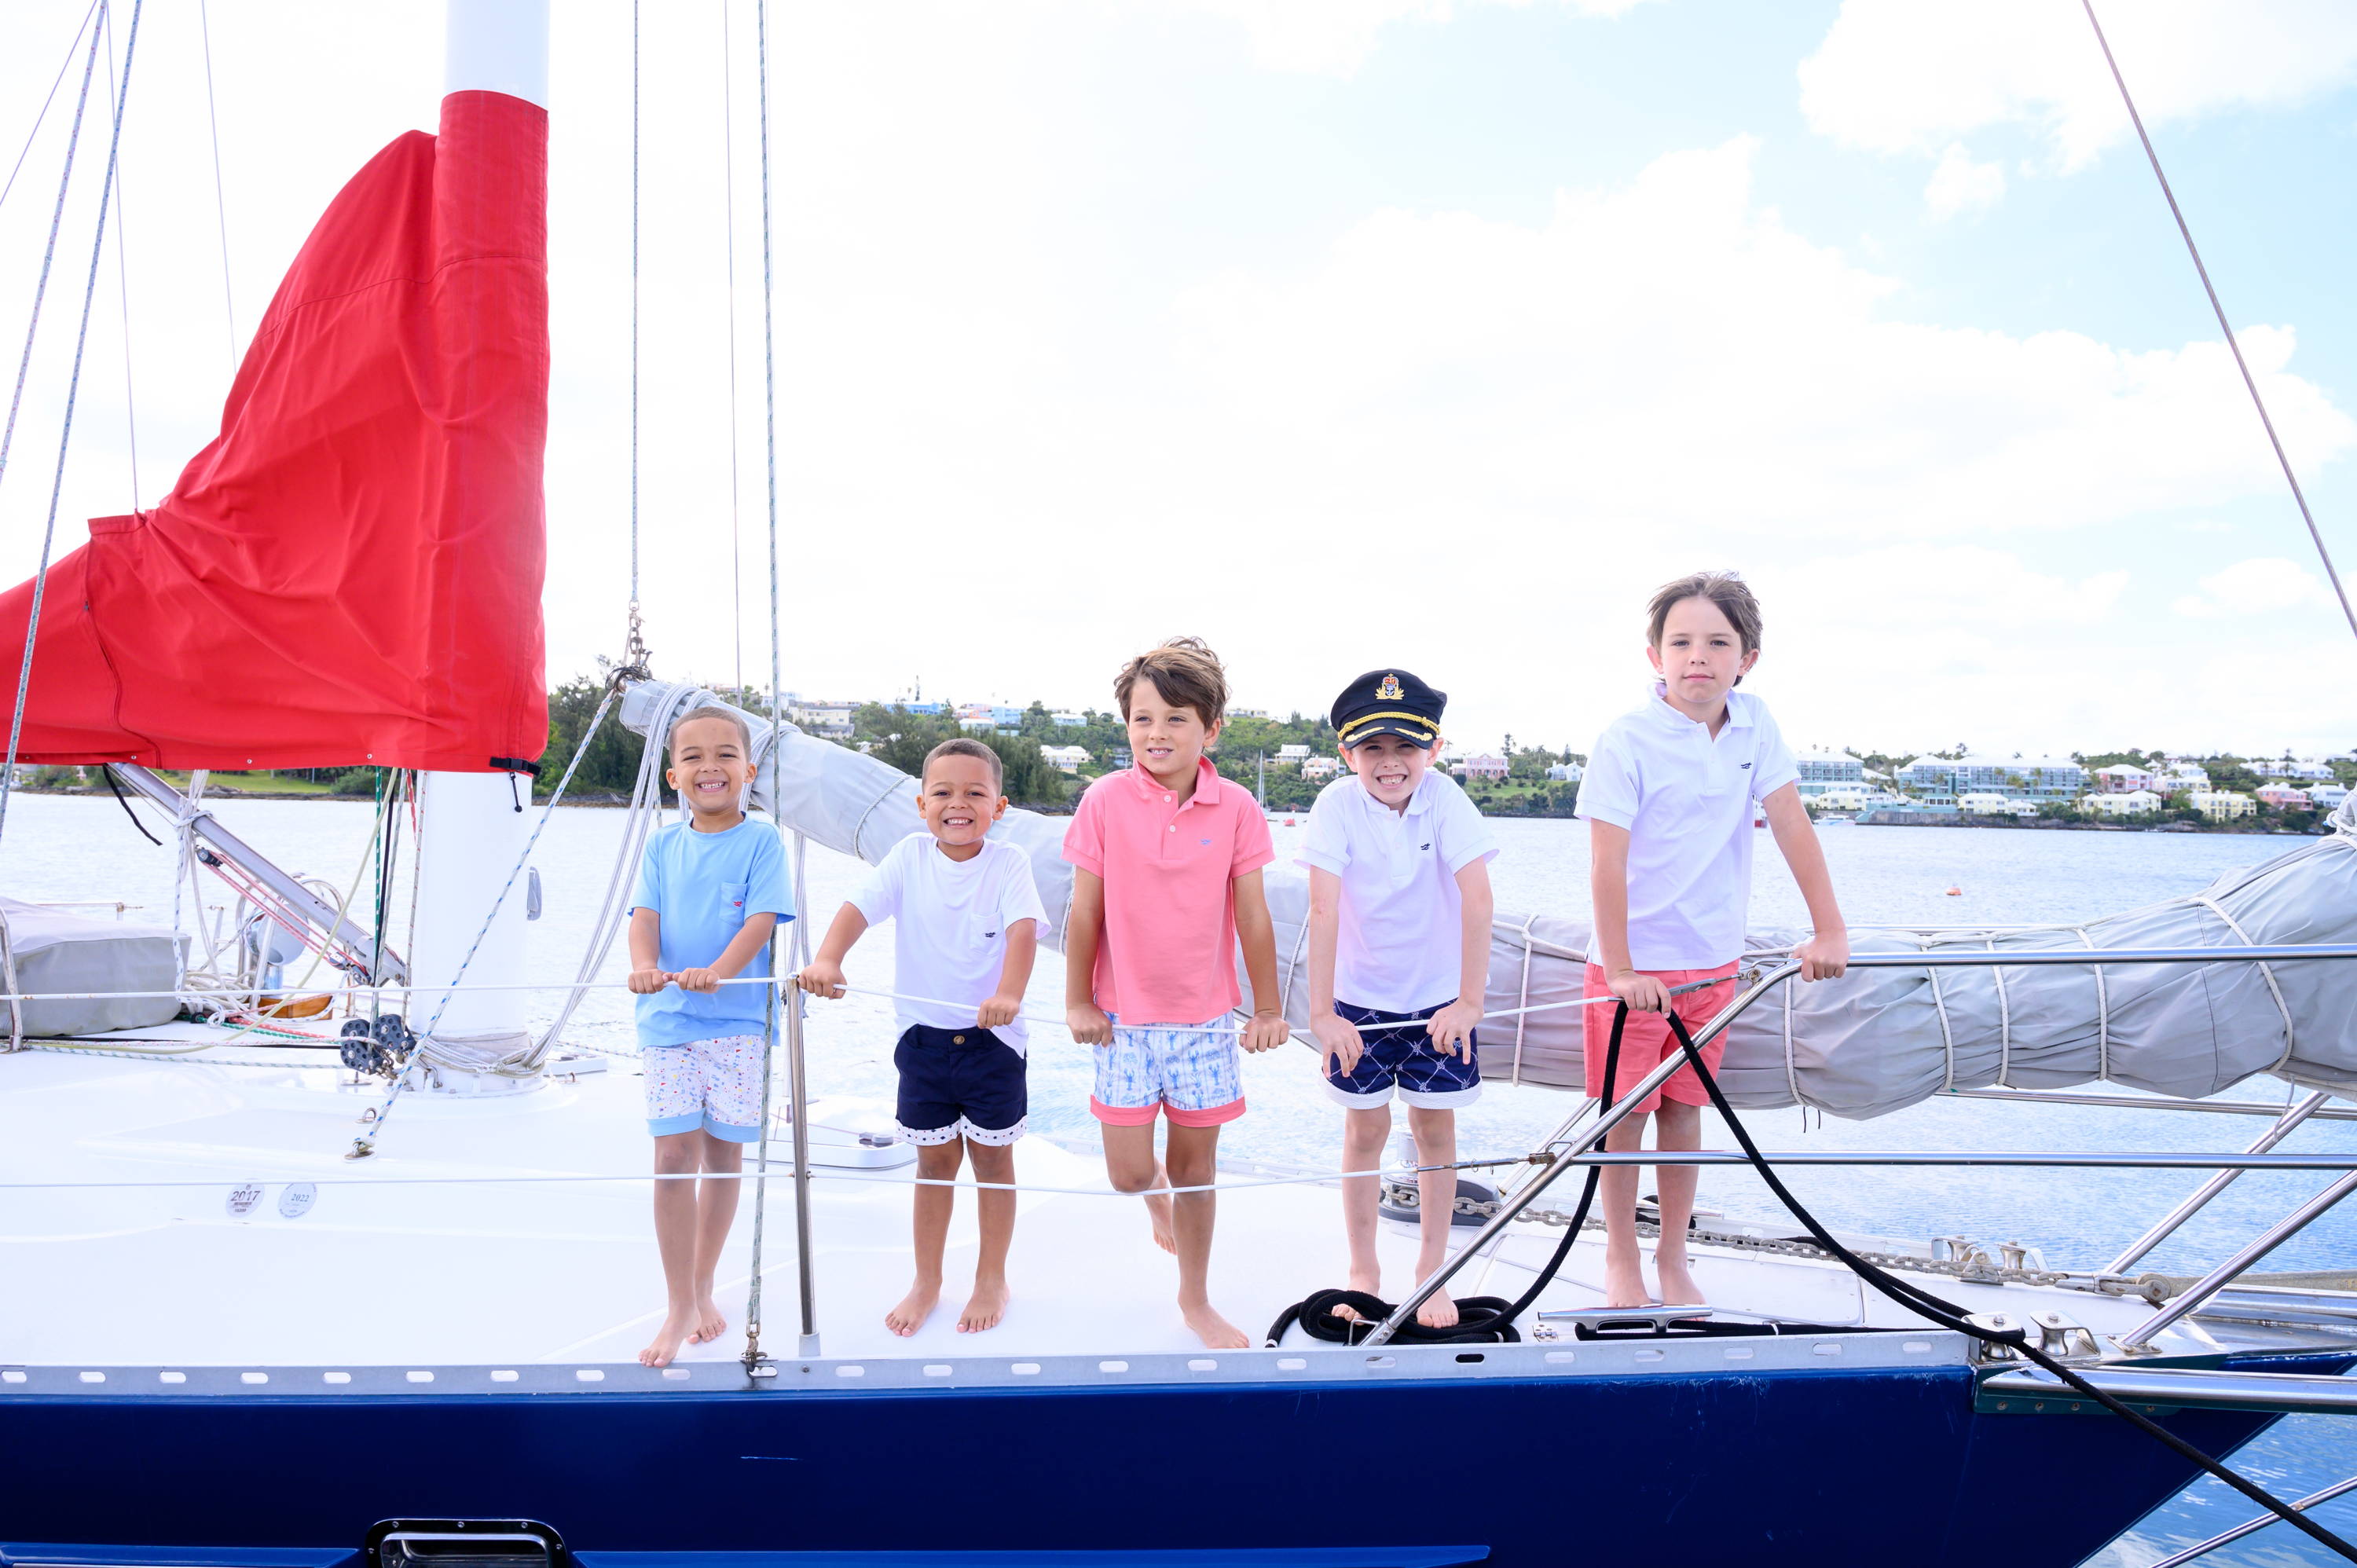 All the kids on boat in our summer 2022 collection of polos, tees and shorts.